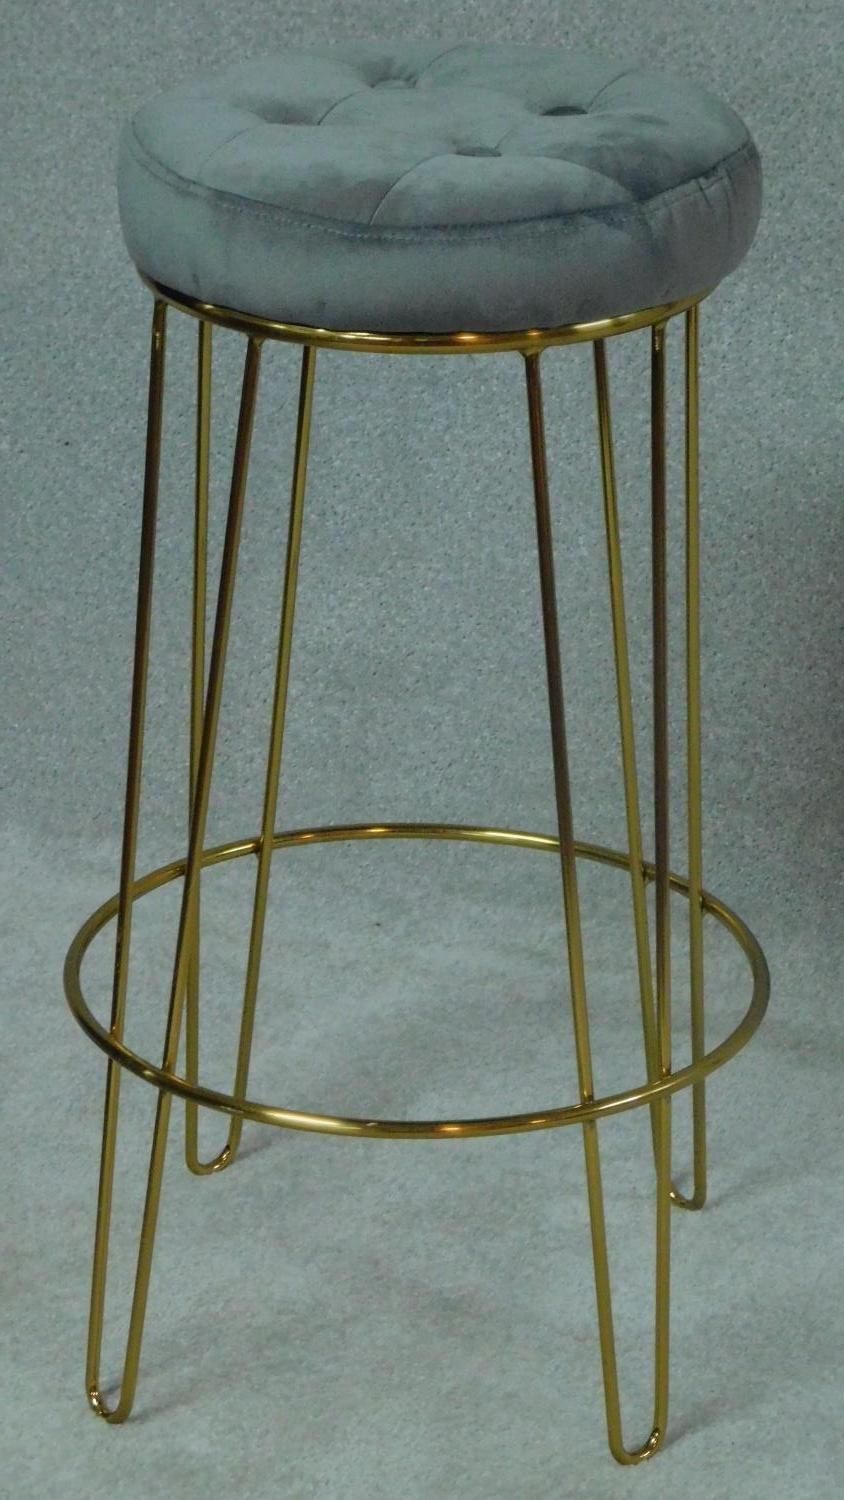 A vintage style cocktail stool in petrol blue buttoned upholstery on gilt metal hairpin supports.